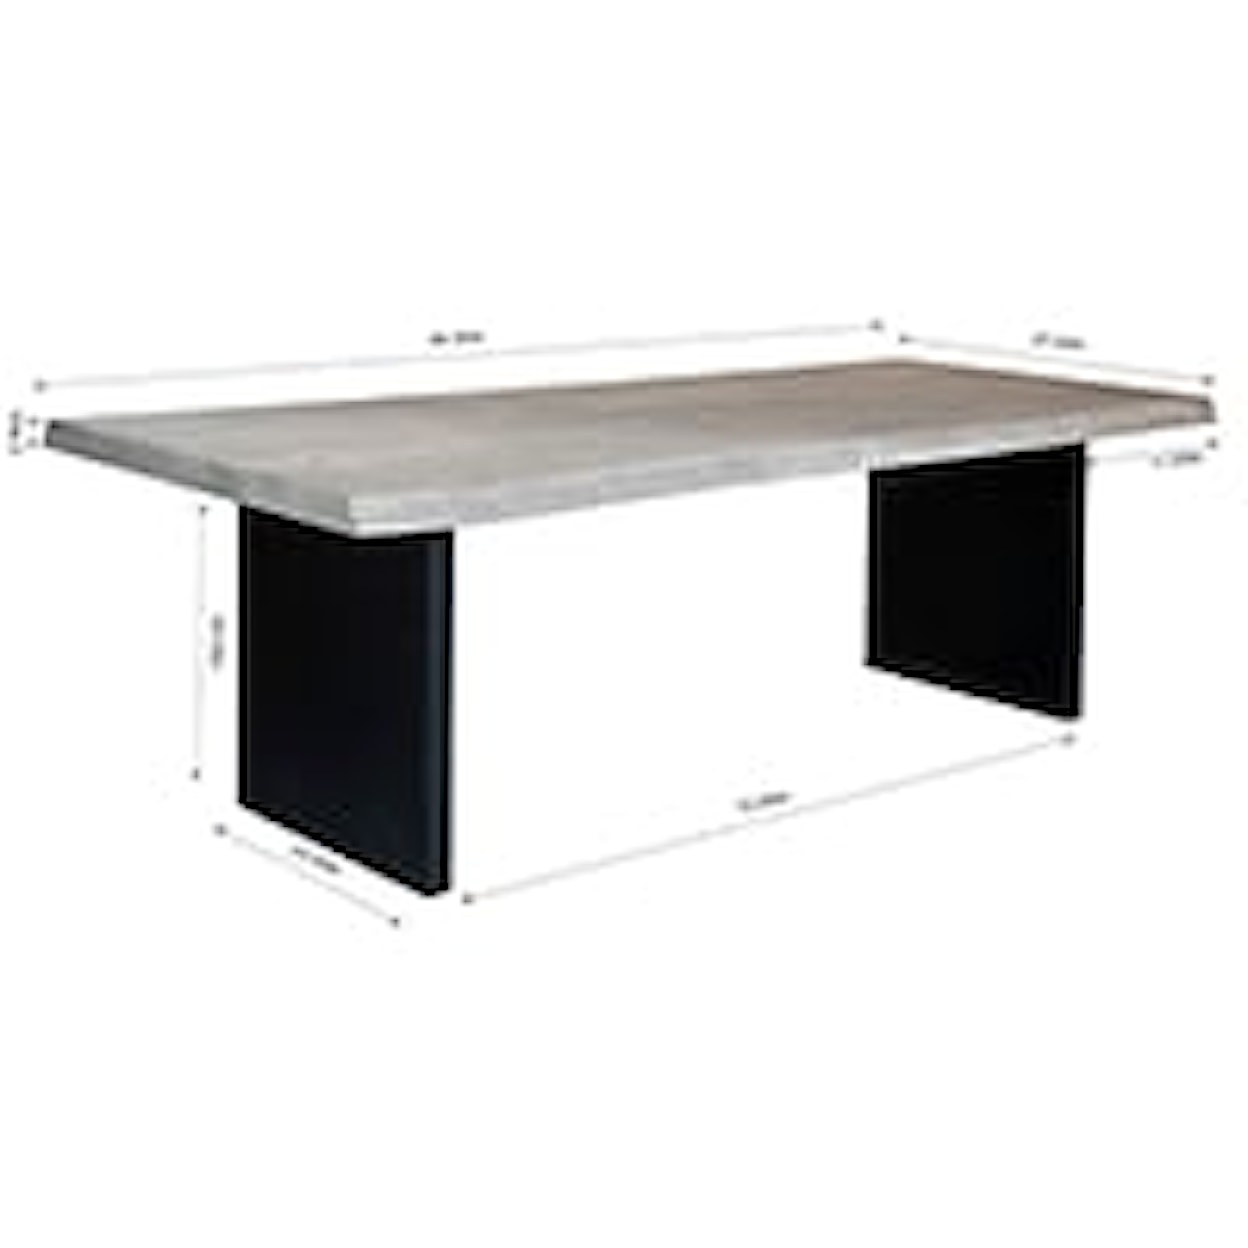 Dovetail Furniture Dining Tables Mansel Dining Table 